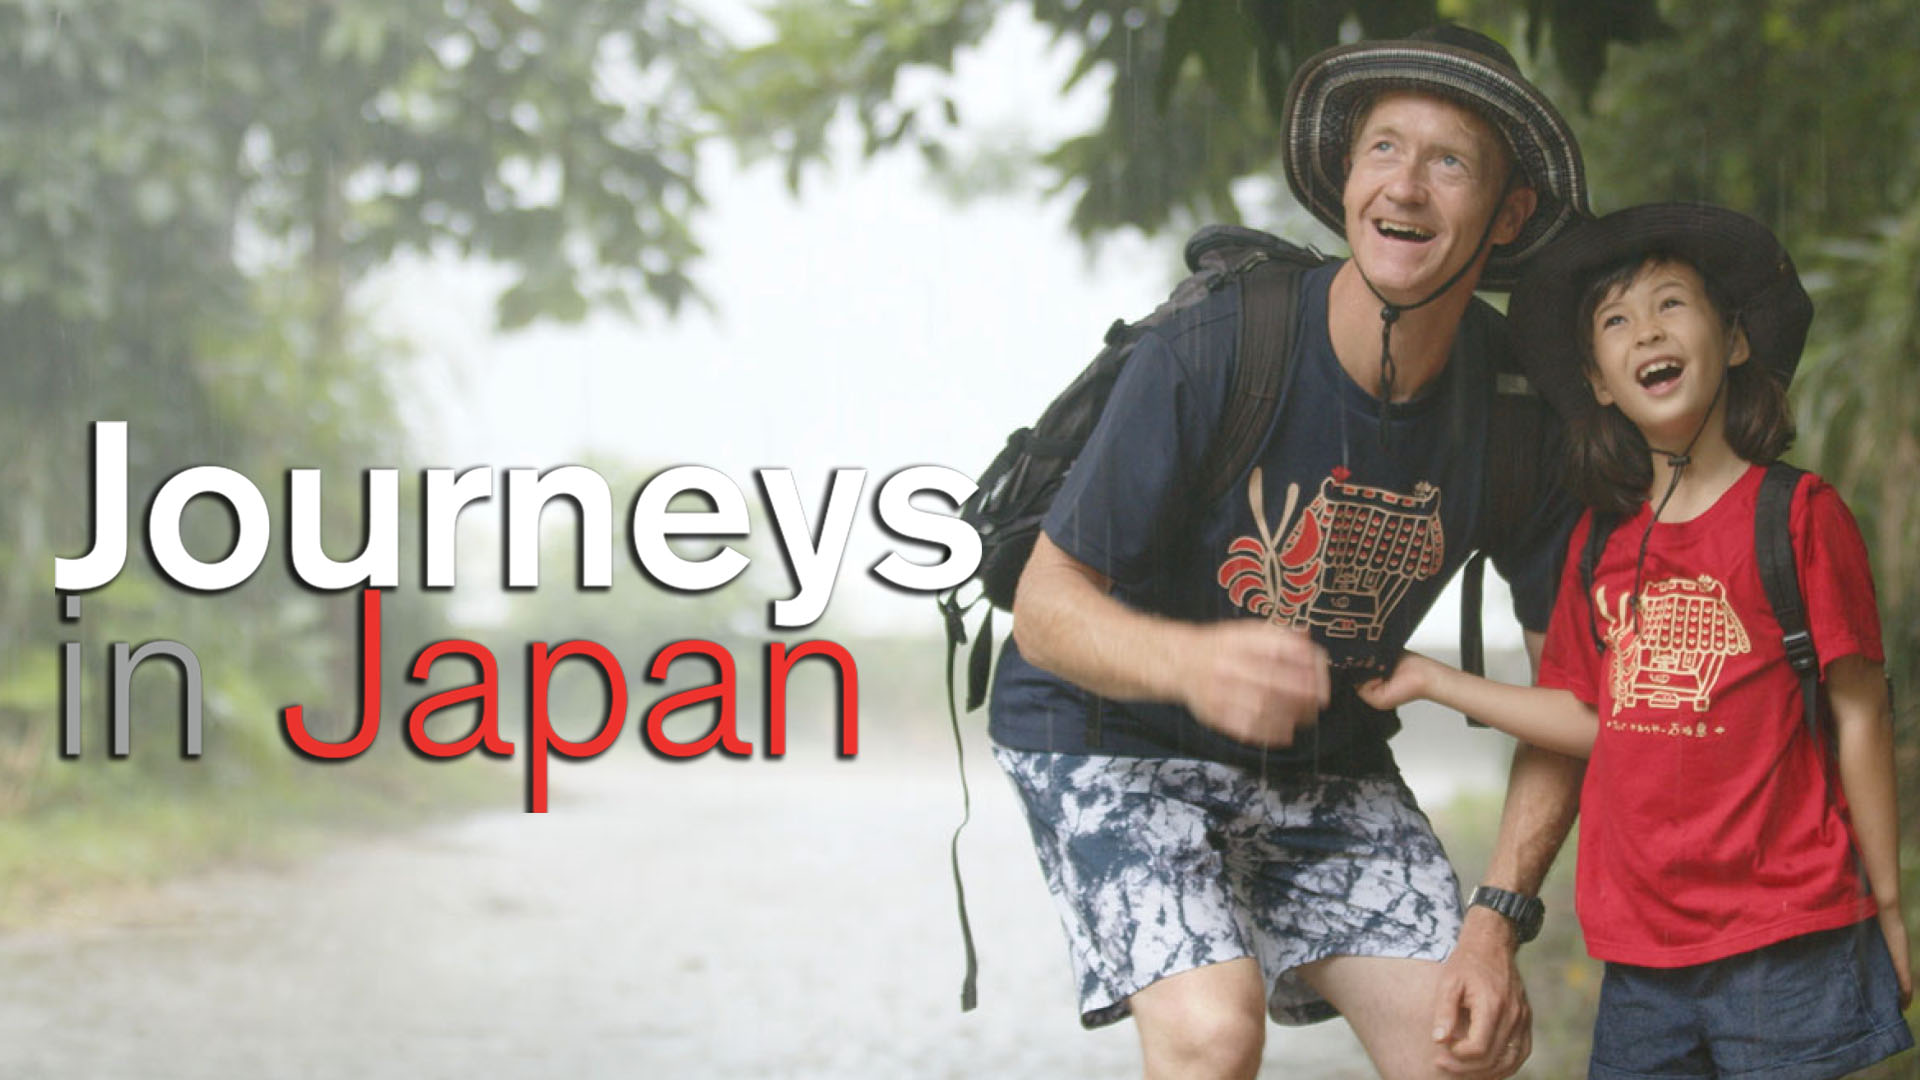 Check out Journeys in Japan Season 9 on your local station!